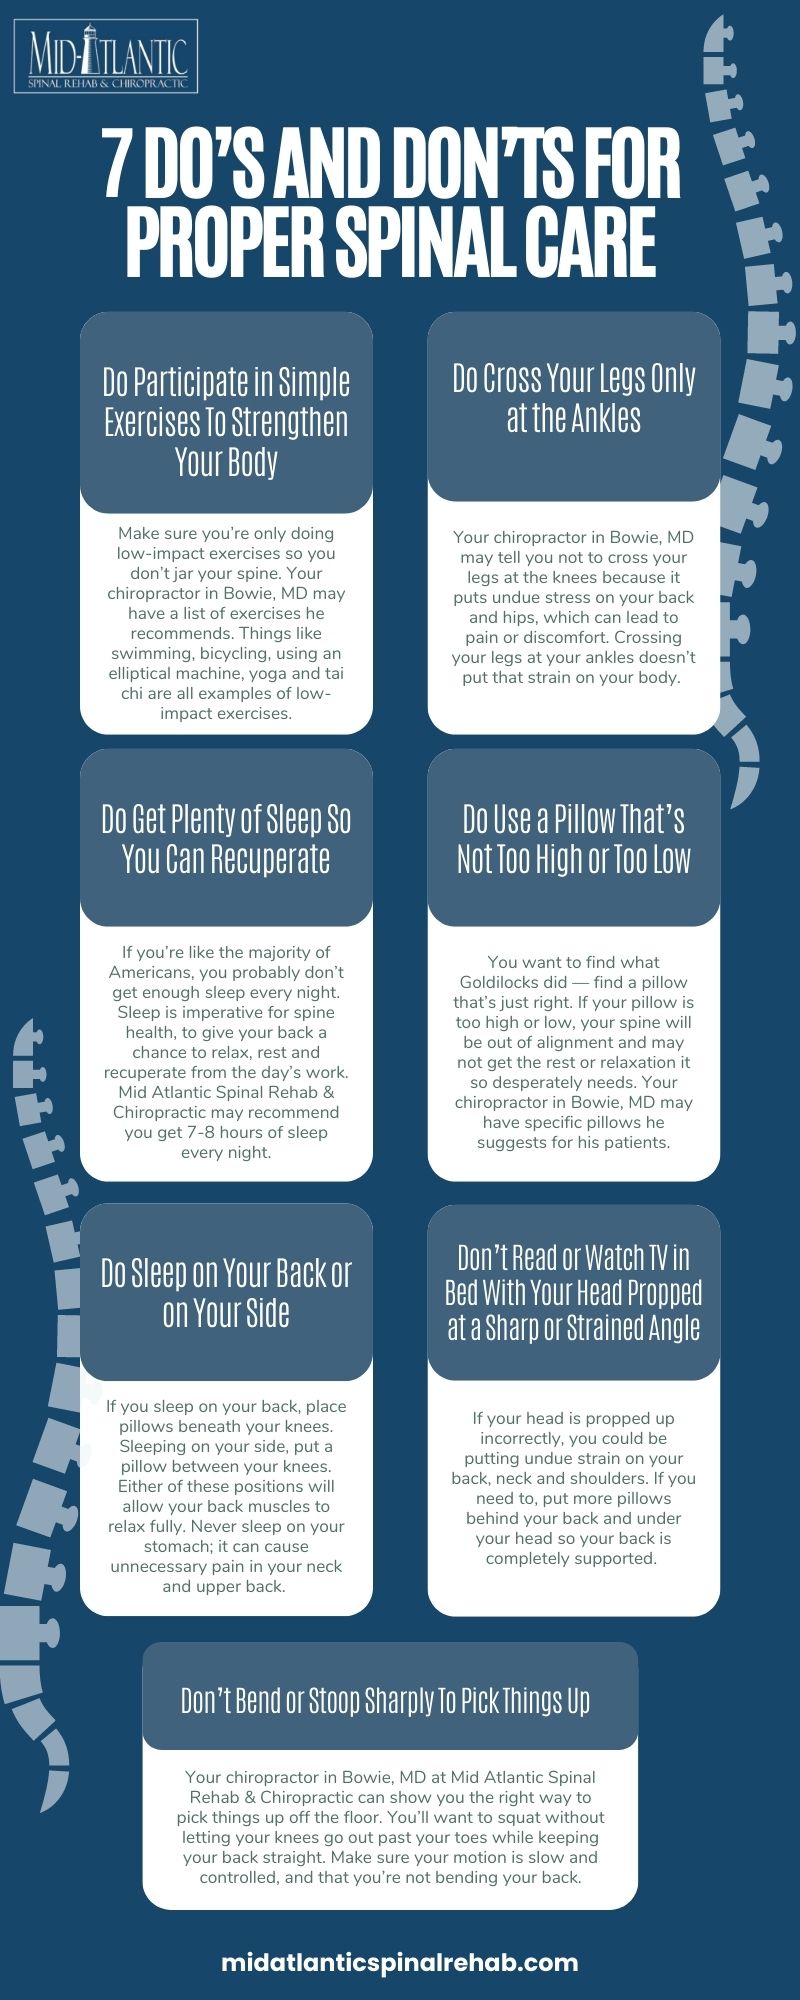 7 Dos and Don't For Proper Spinal Care Infographic